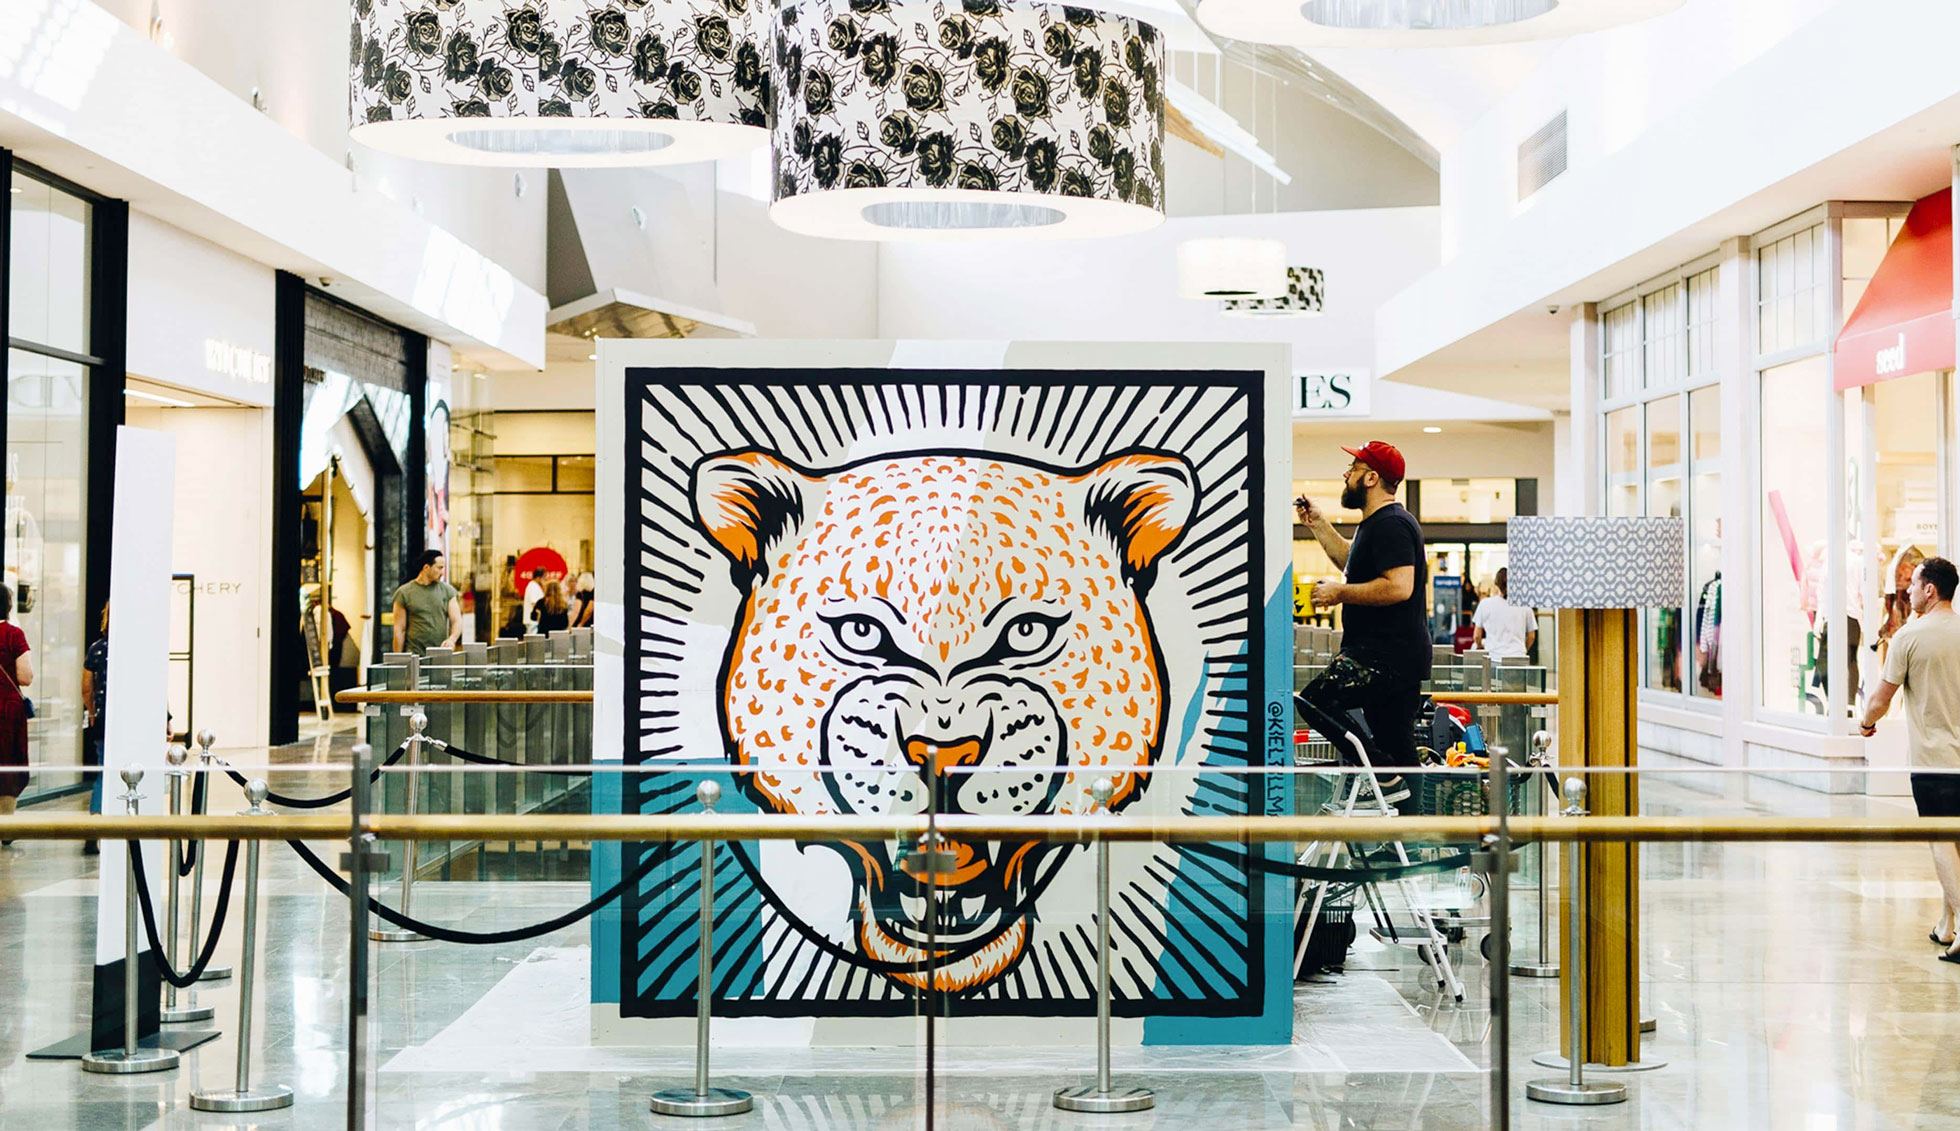 Kiel paints his 4-sided cube mural in the centre of the shopping causeway